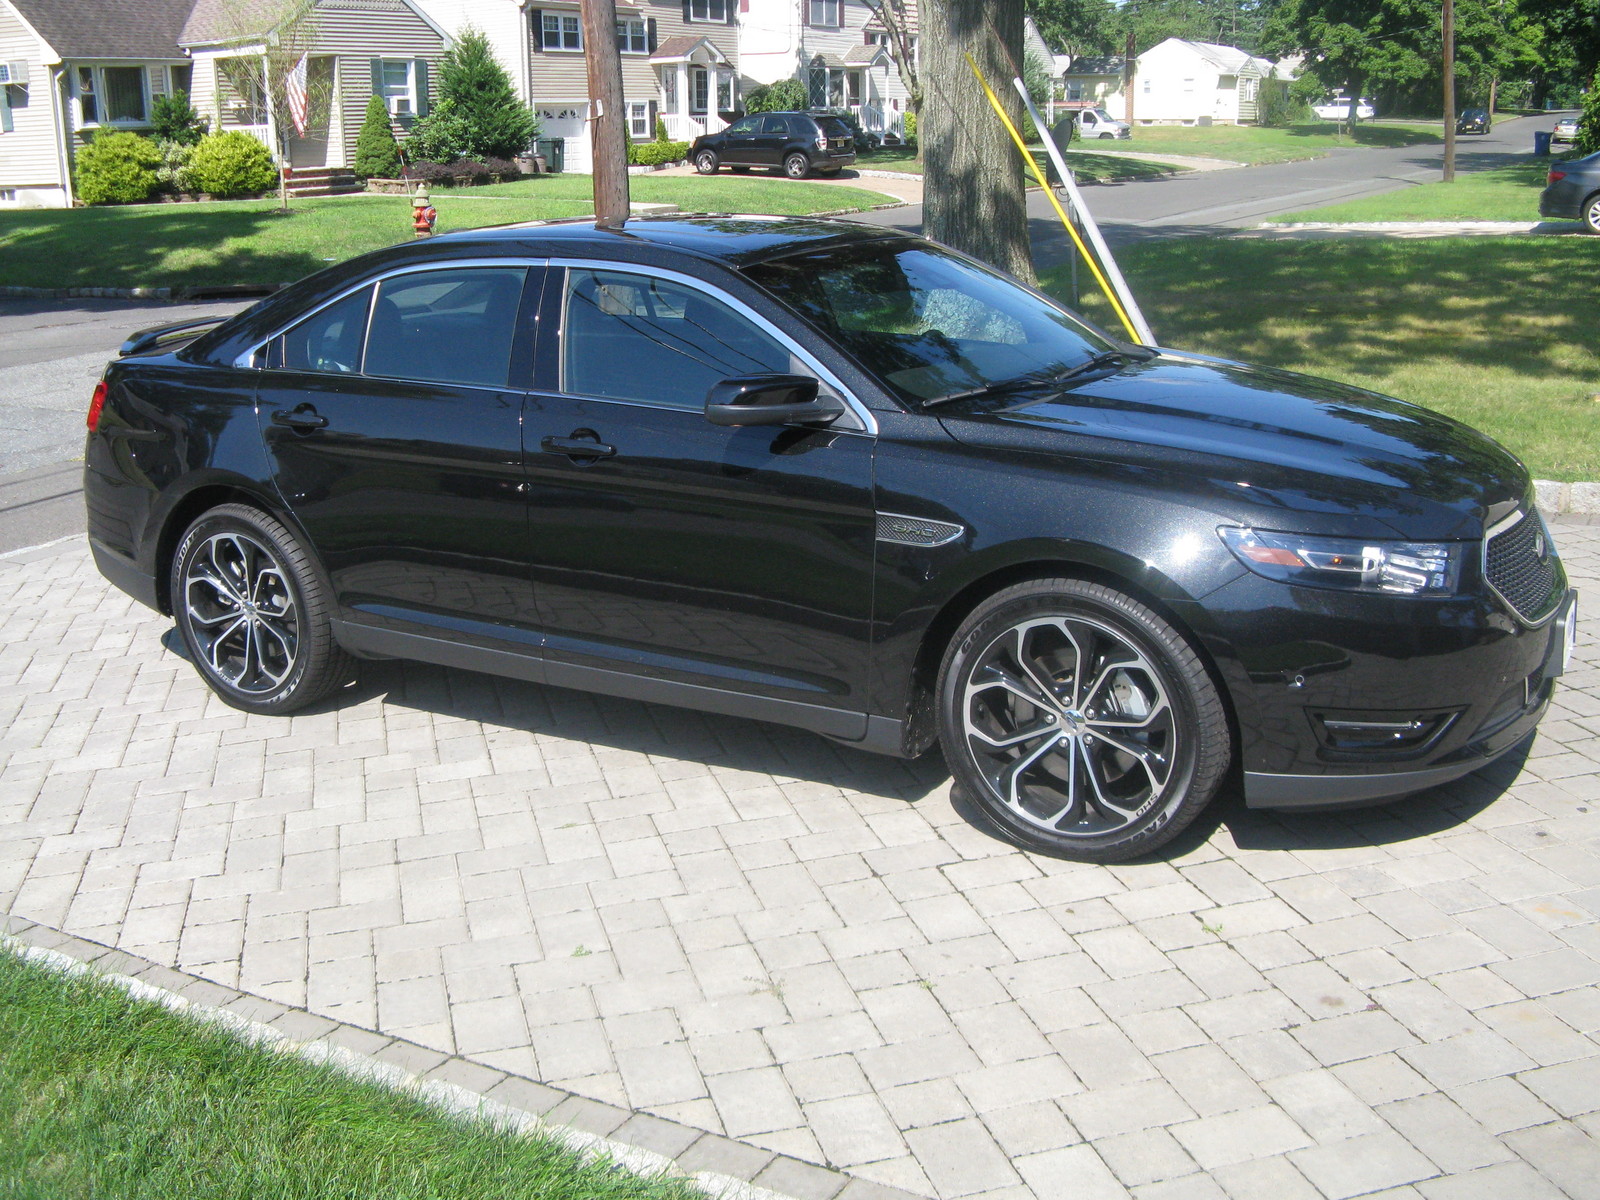 2013 black Ford Taurus PP LMS tune picture, mods, upgrades